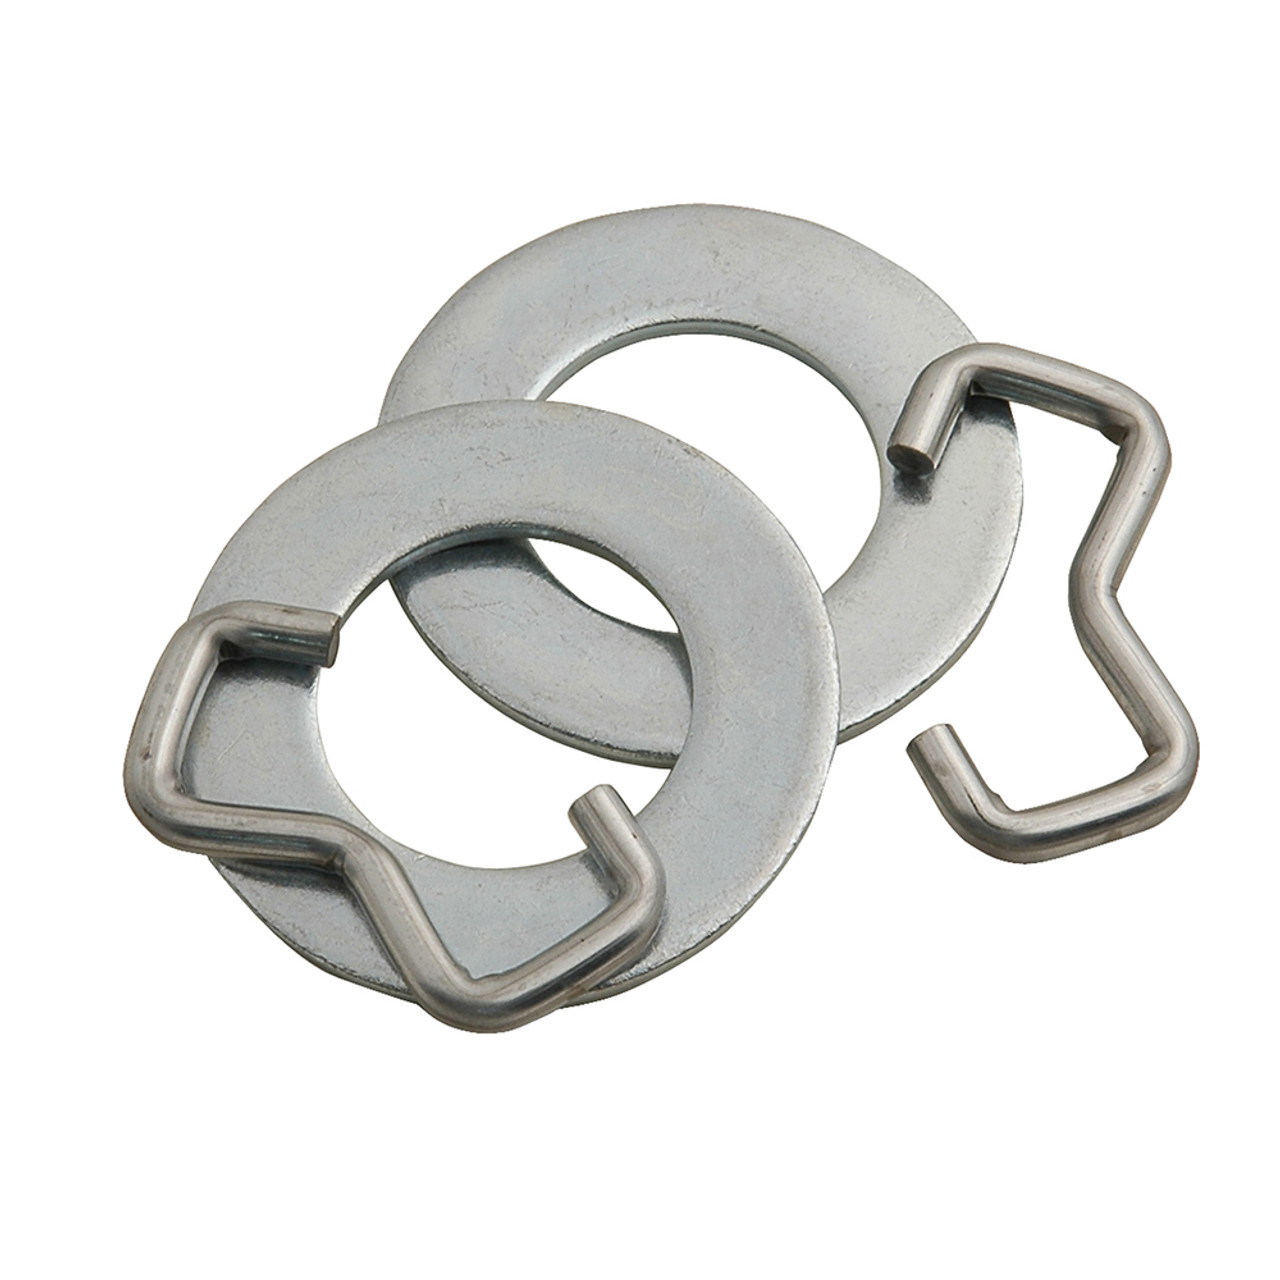 C.E. Smith 10980 Wobble Roller Retainer Ring - Zinc Plated